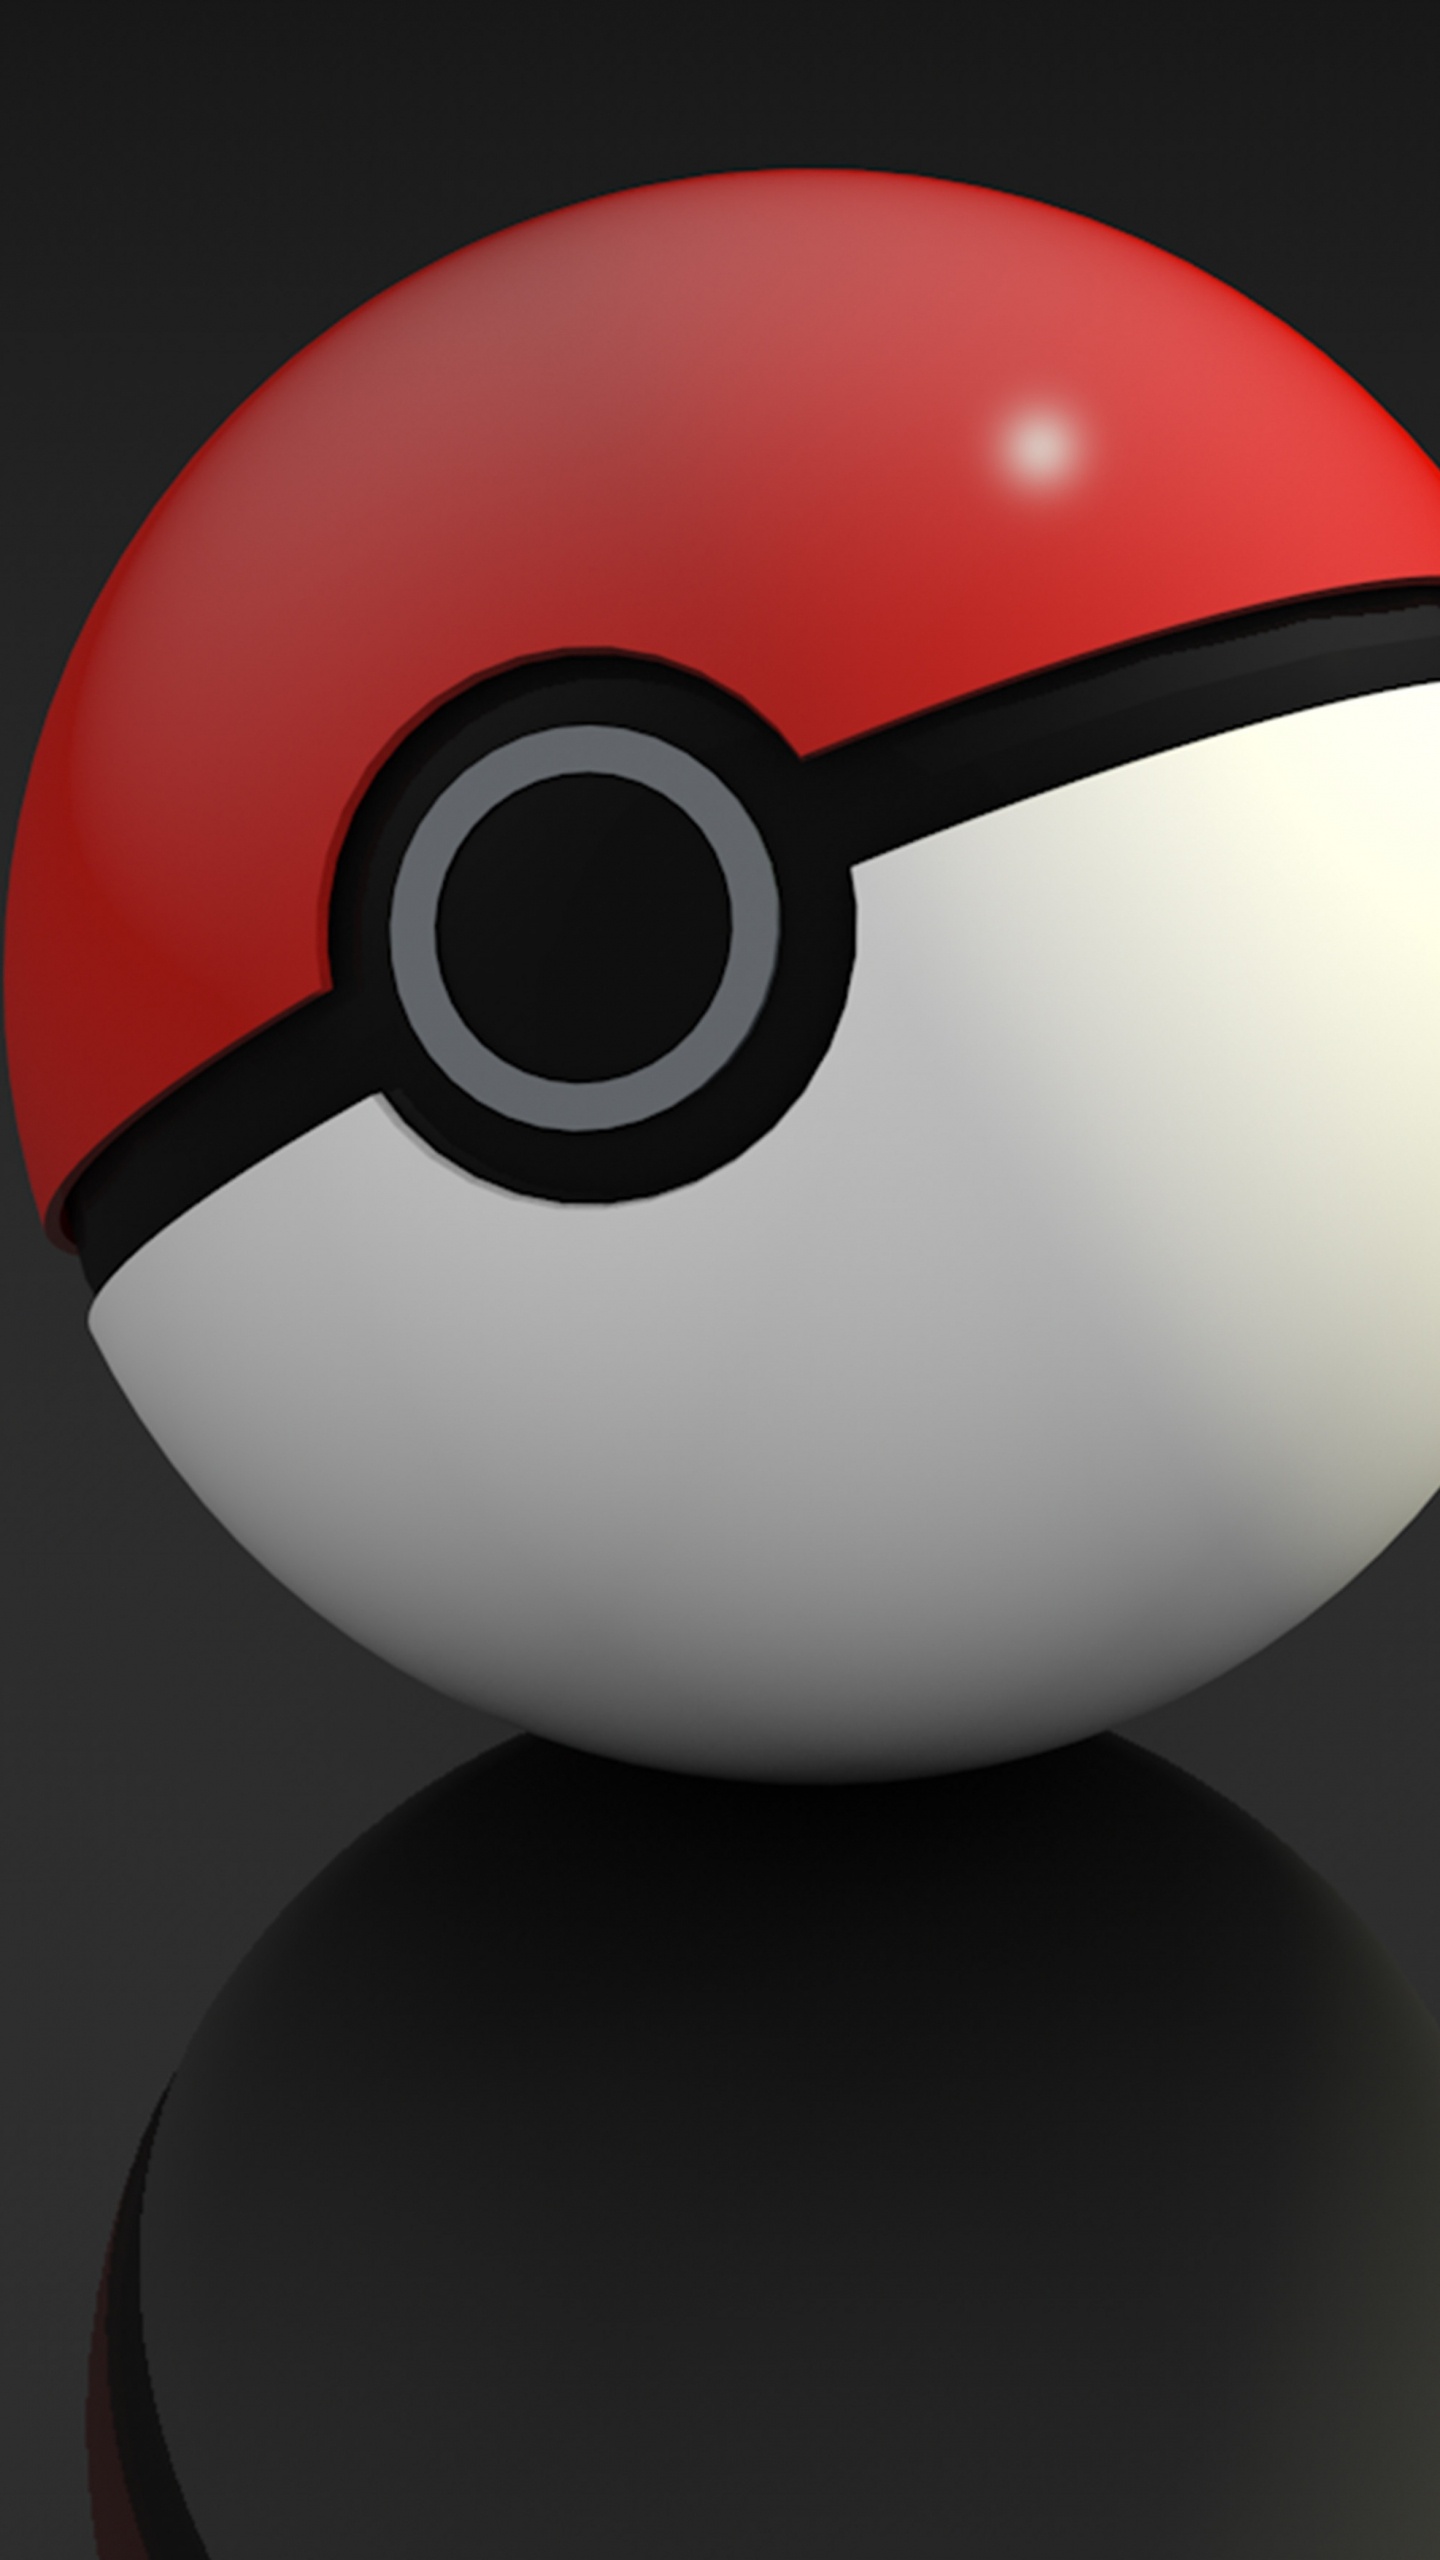 Pok Ball, Ball, Animation, Auge, Games. Wallpaper in 1440x2560 Resolution